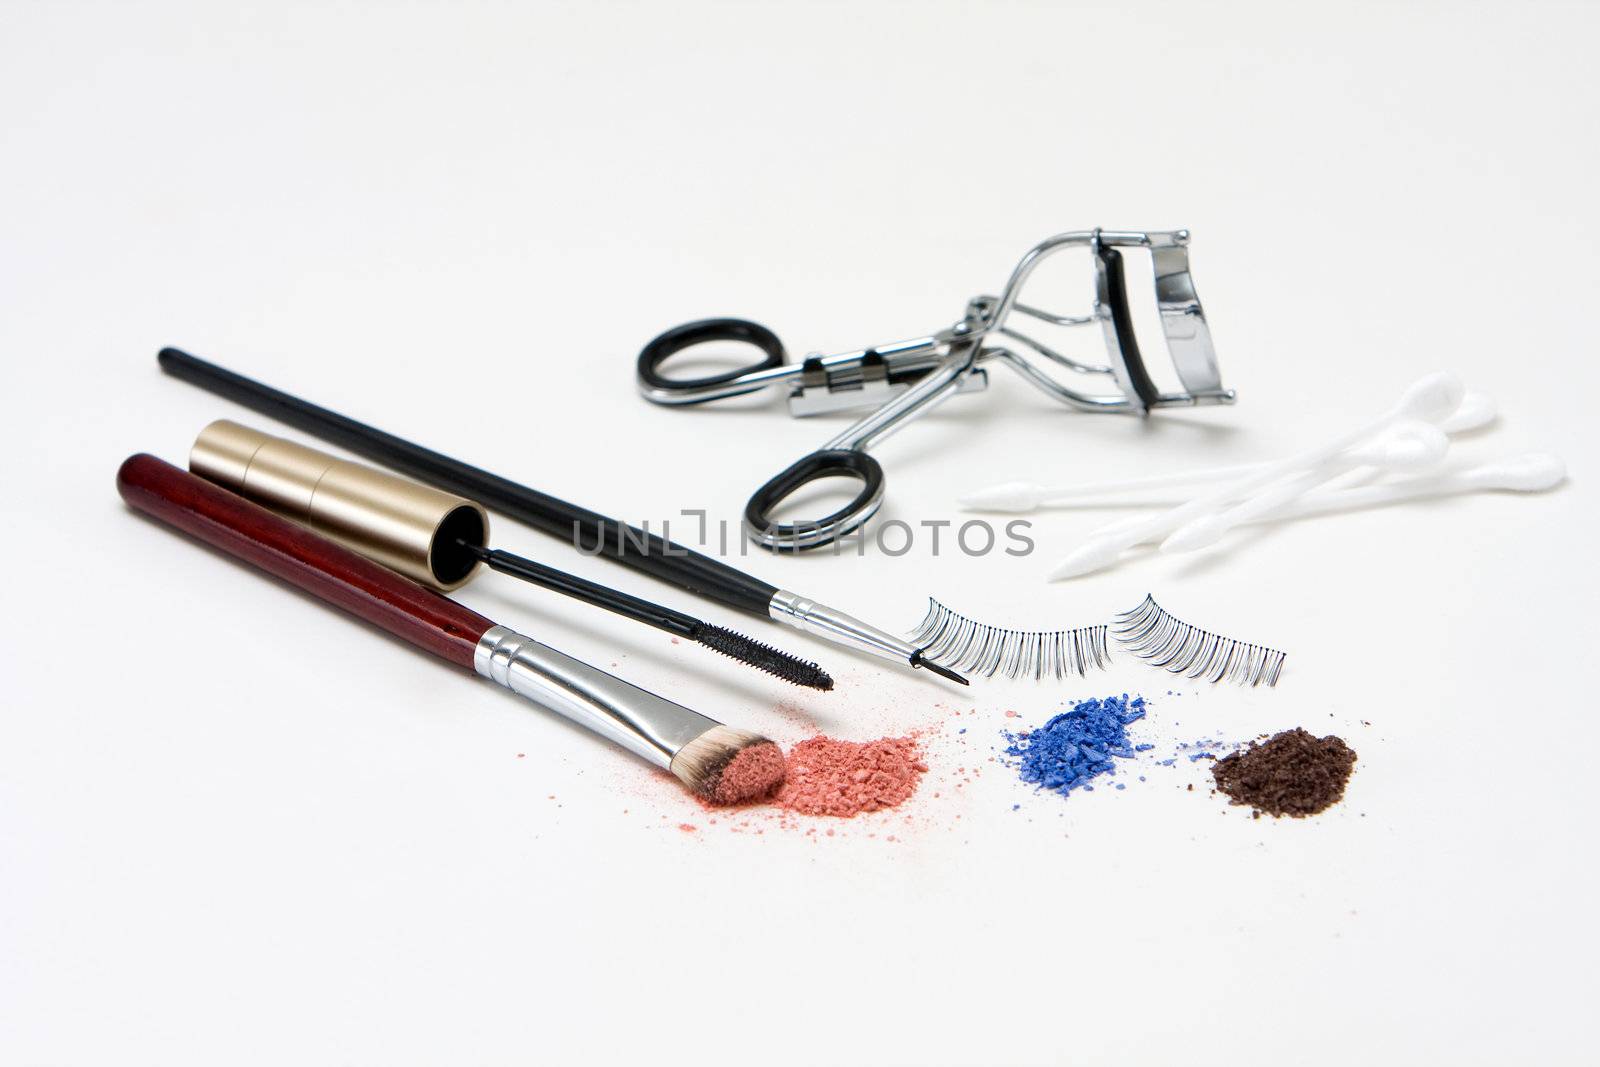 Makeup set for the eyes with eyeshadows, brush, mascara, curler, q-tips and lashes, isolated